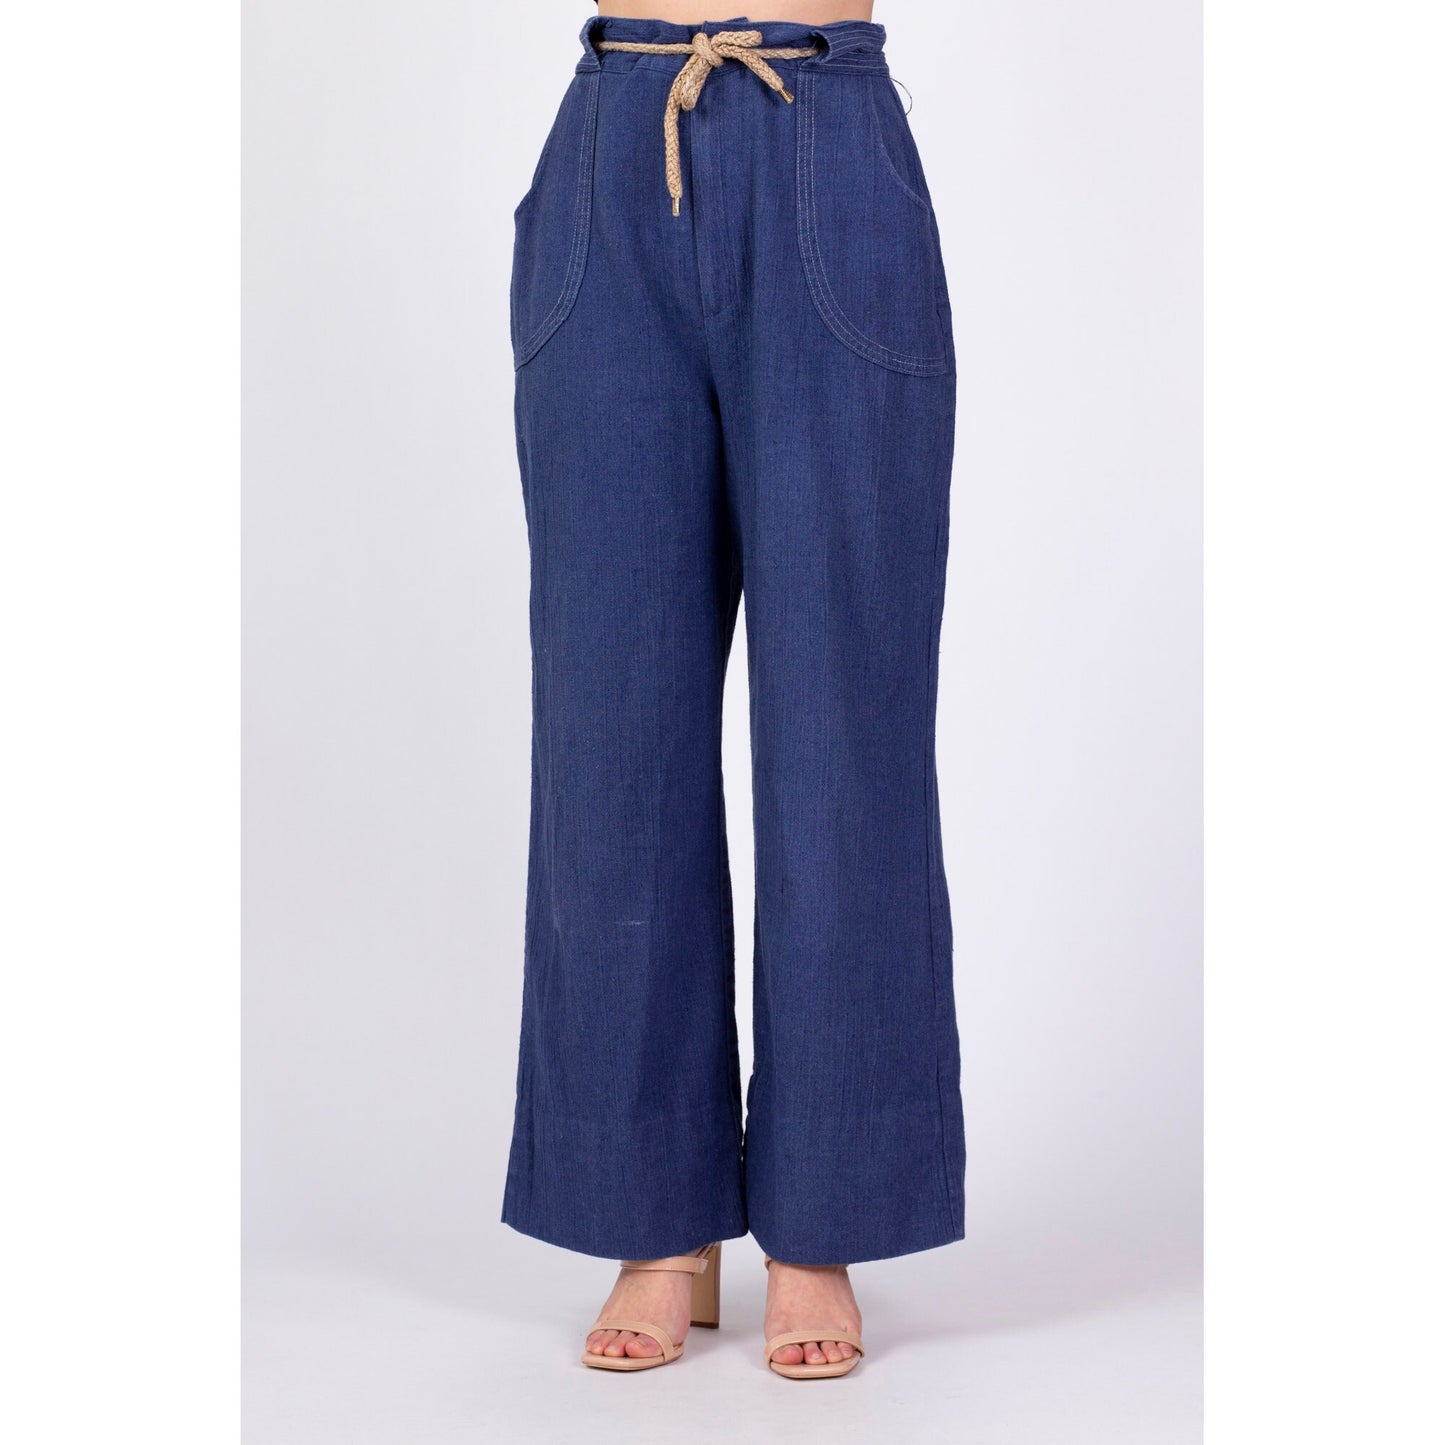 70s Straight Leg Chambray Trousers - Large, 30.5" 